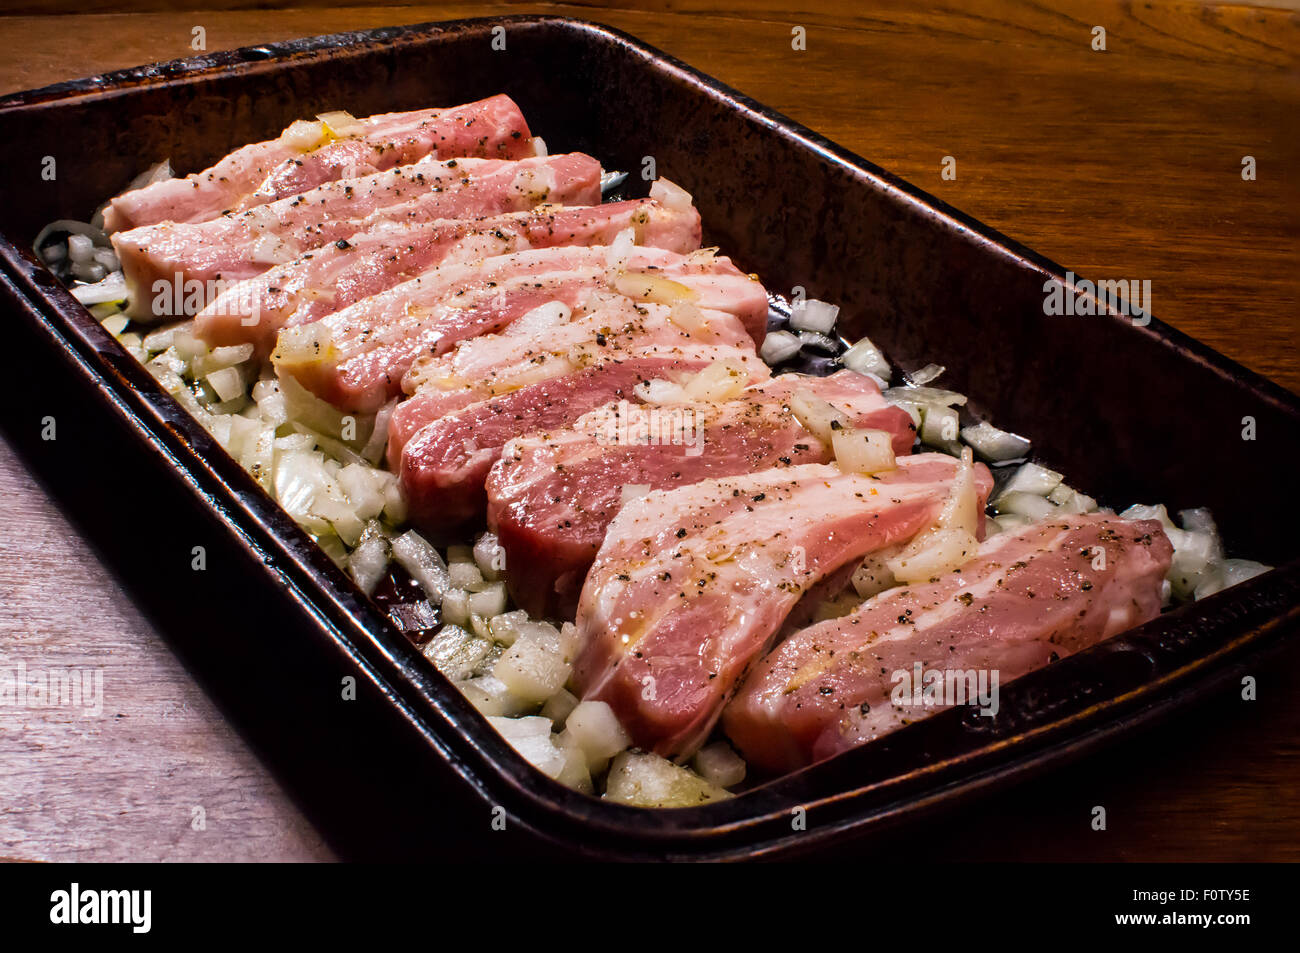 Pork belly slices prepared for baking in the oven Stock Photo